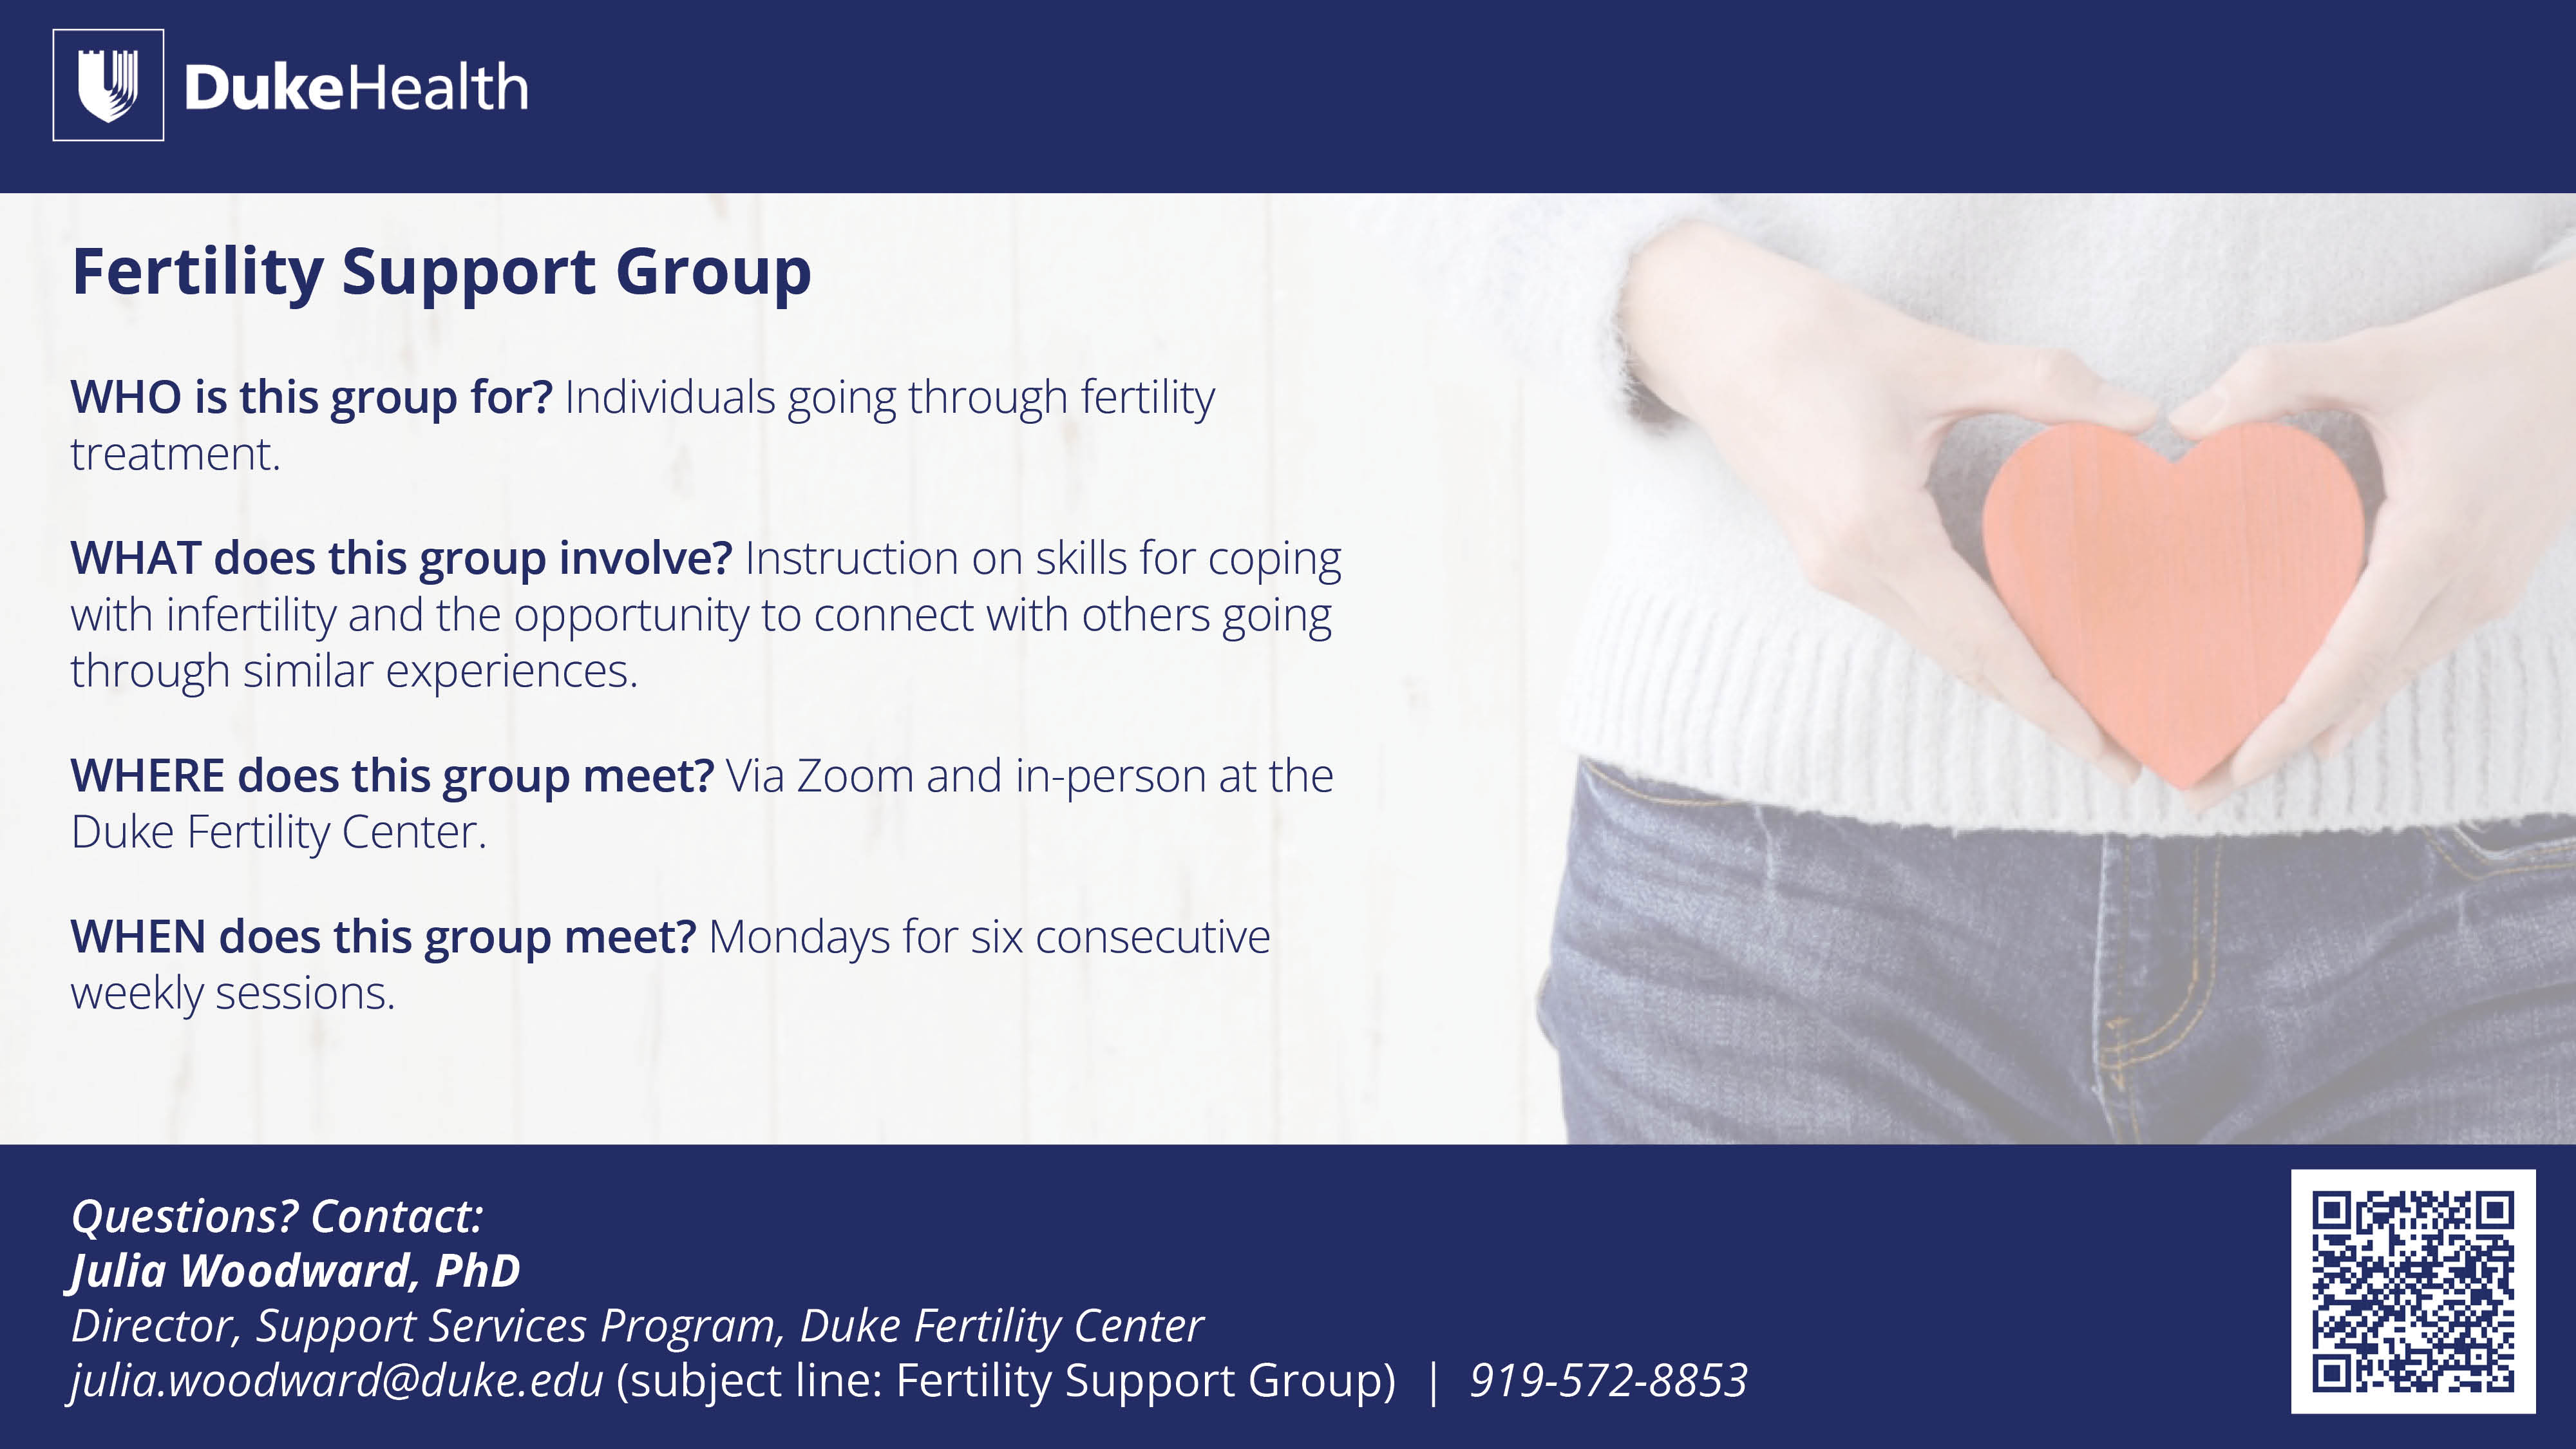 Duke Fertility Support Group - Full image text provided below